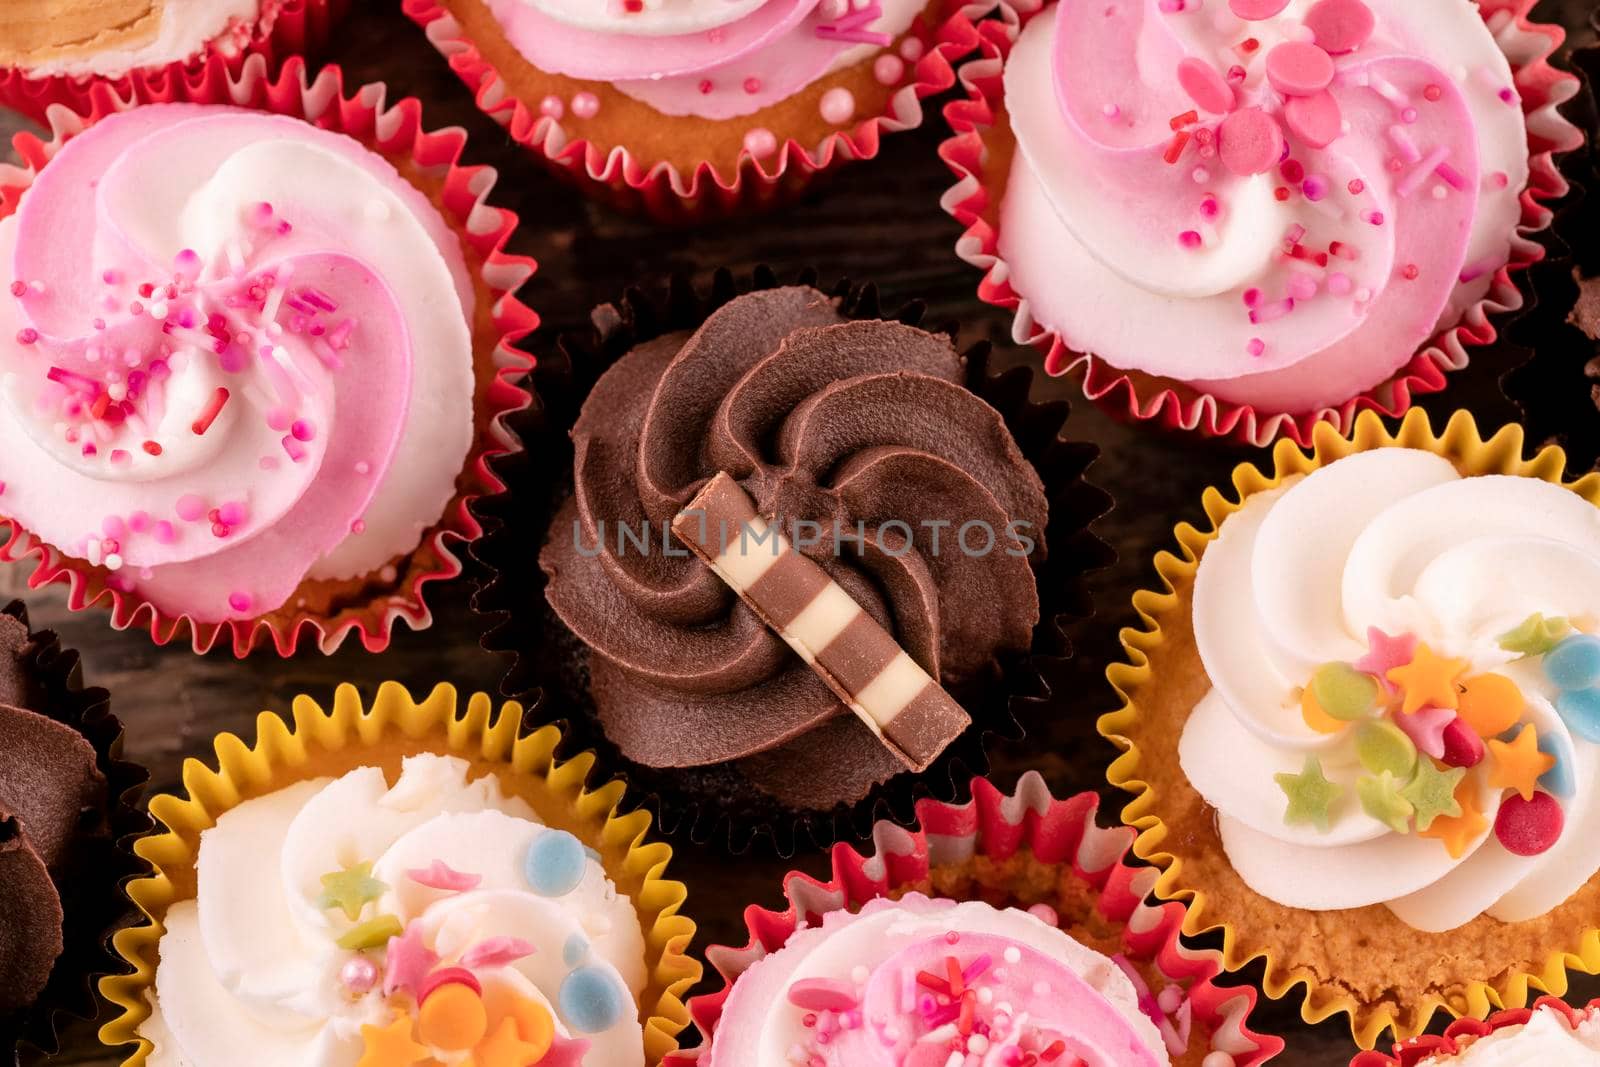 muffins cupcakes on a wooden background high-quality photos for calendar and cards. by Iryna_Melnyk